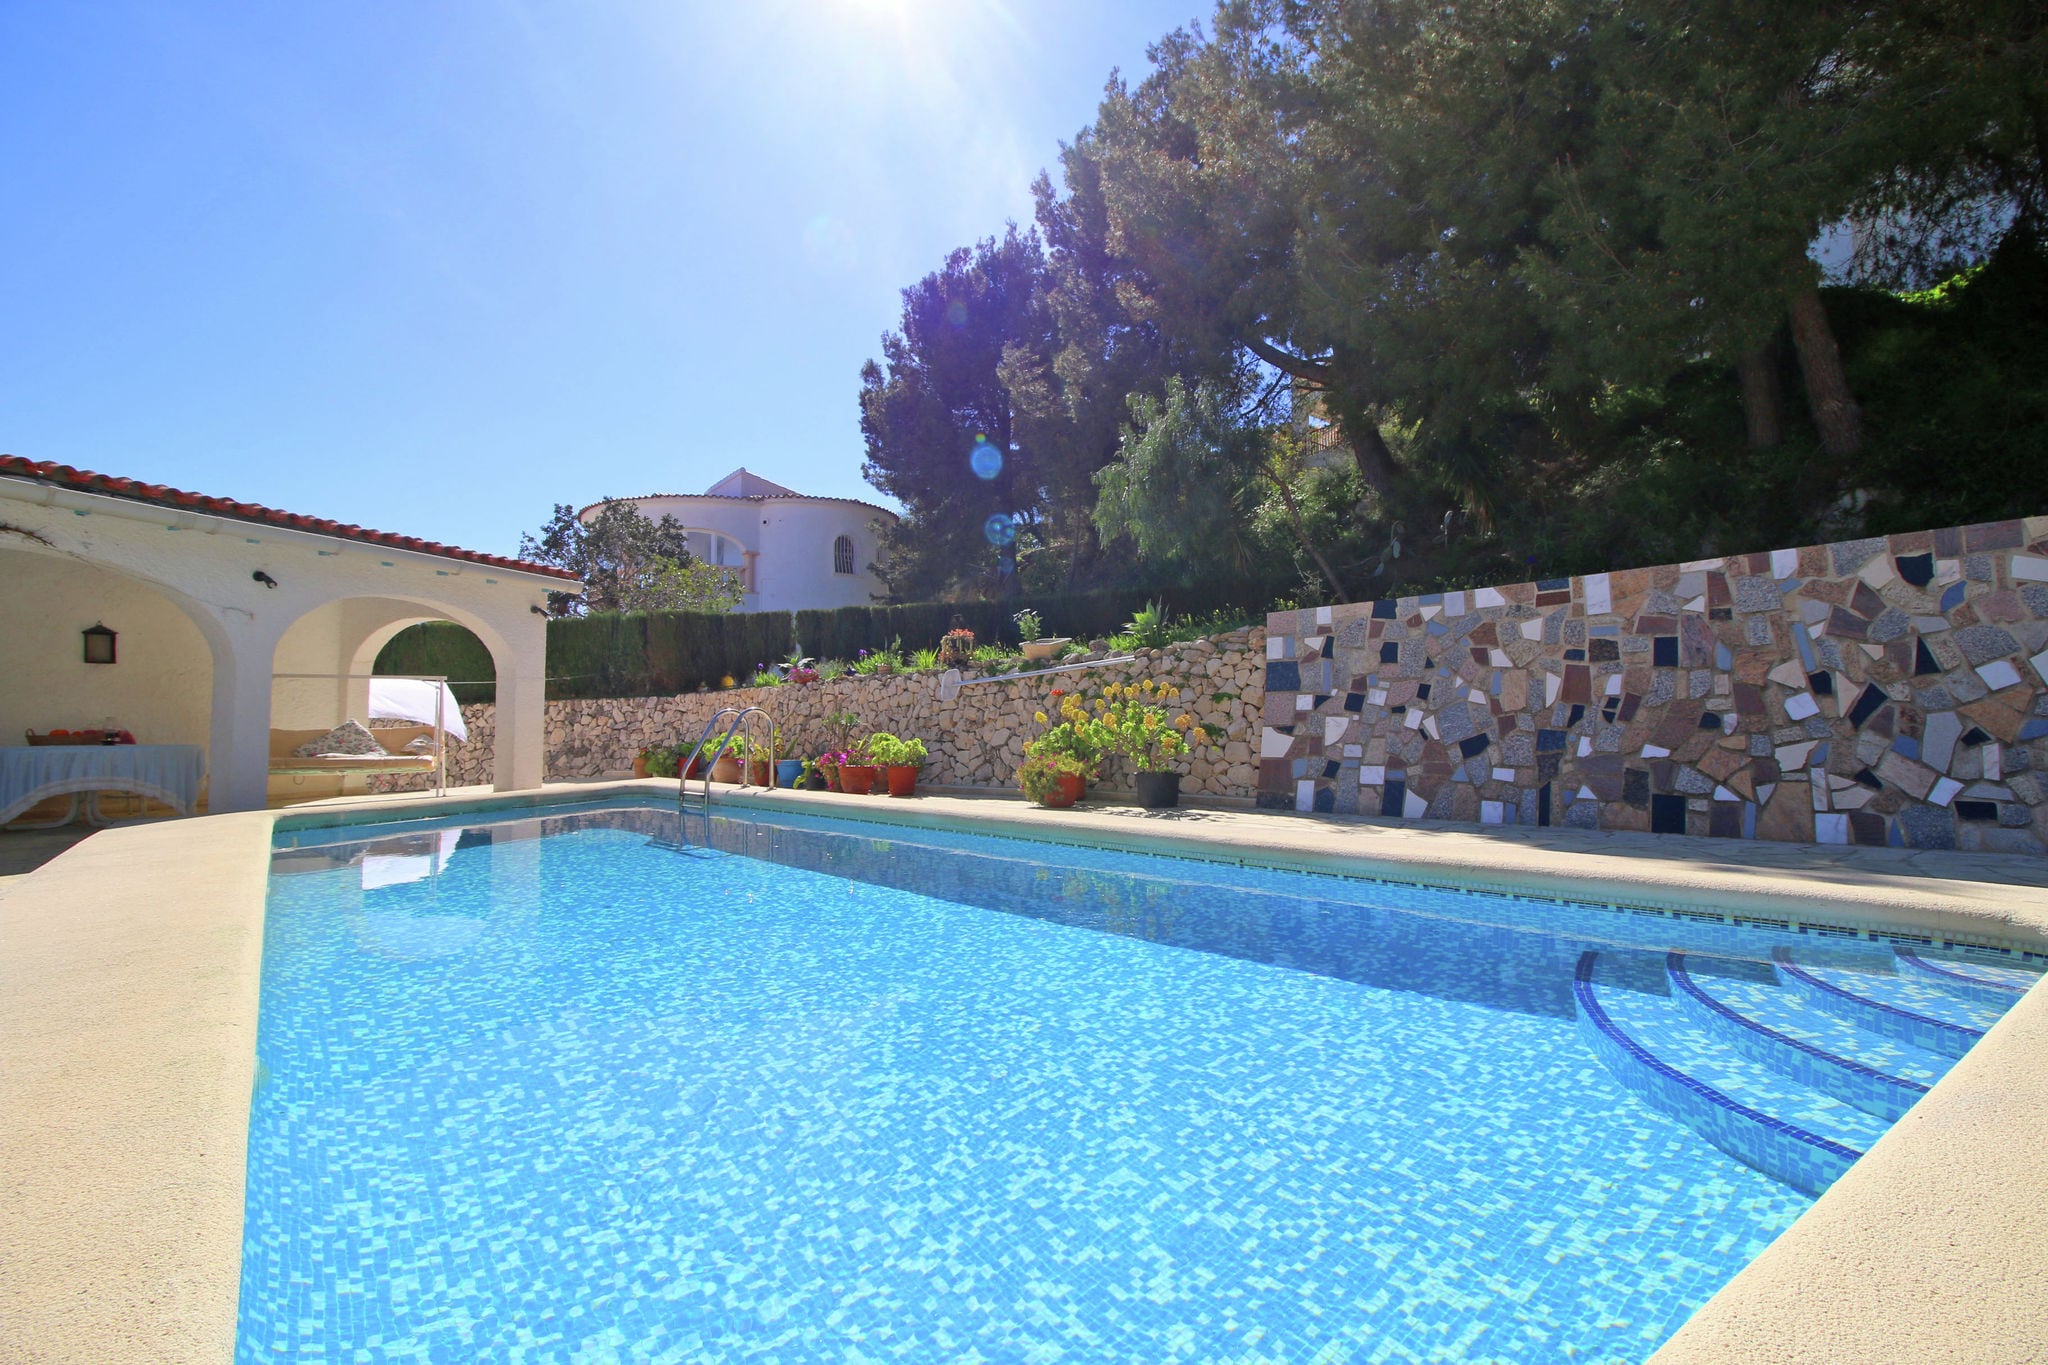 Holiday villa 3km from the beach with a private pool